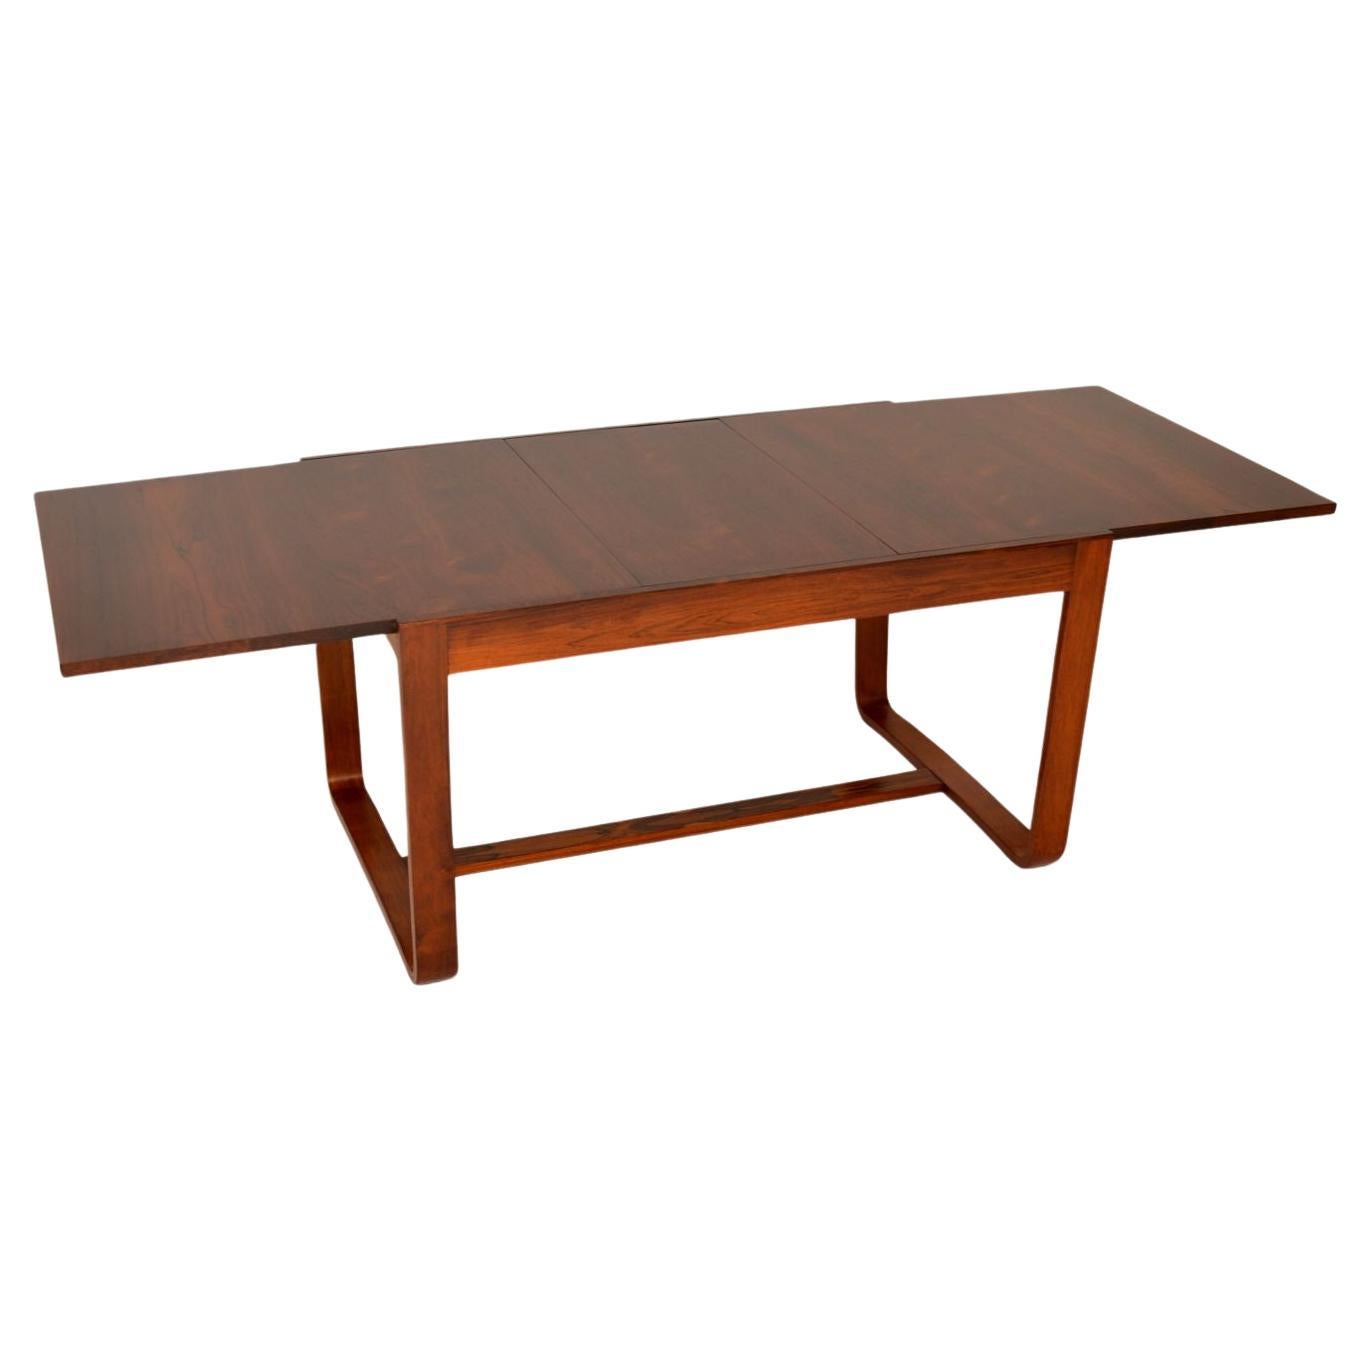 1960s Vintage Dining Table by Uniflex